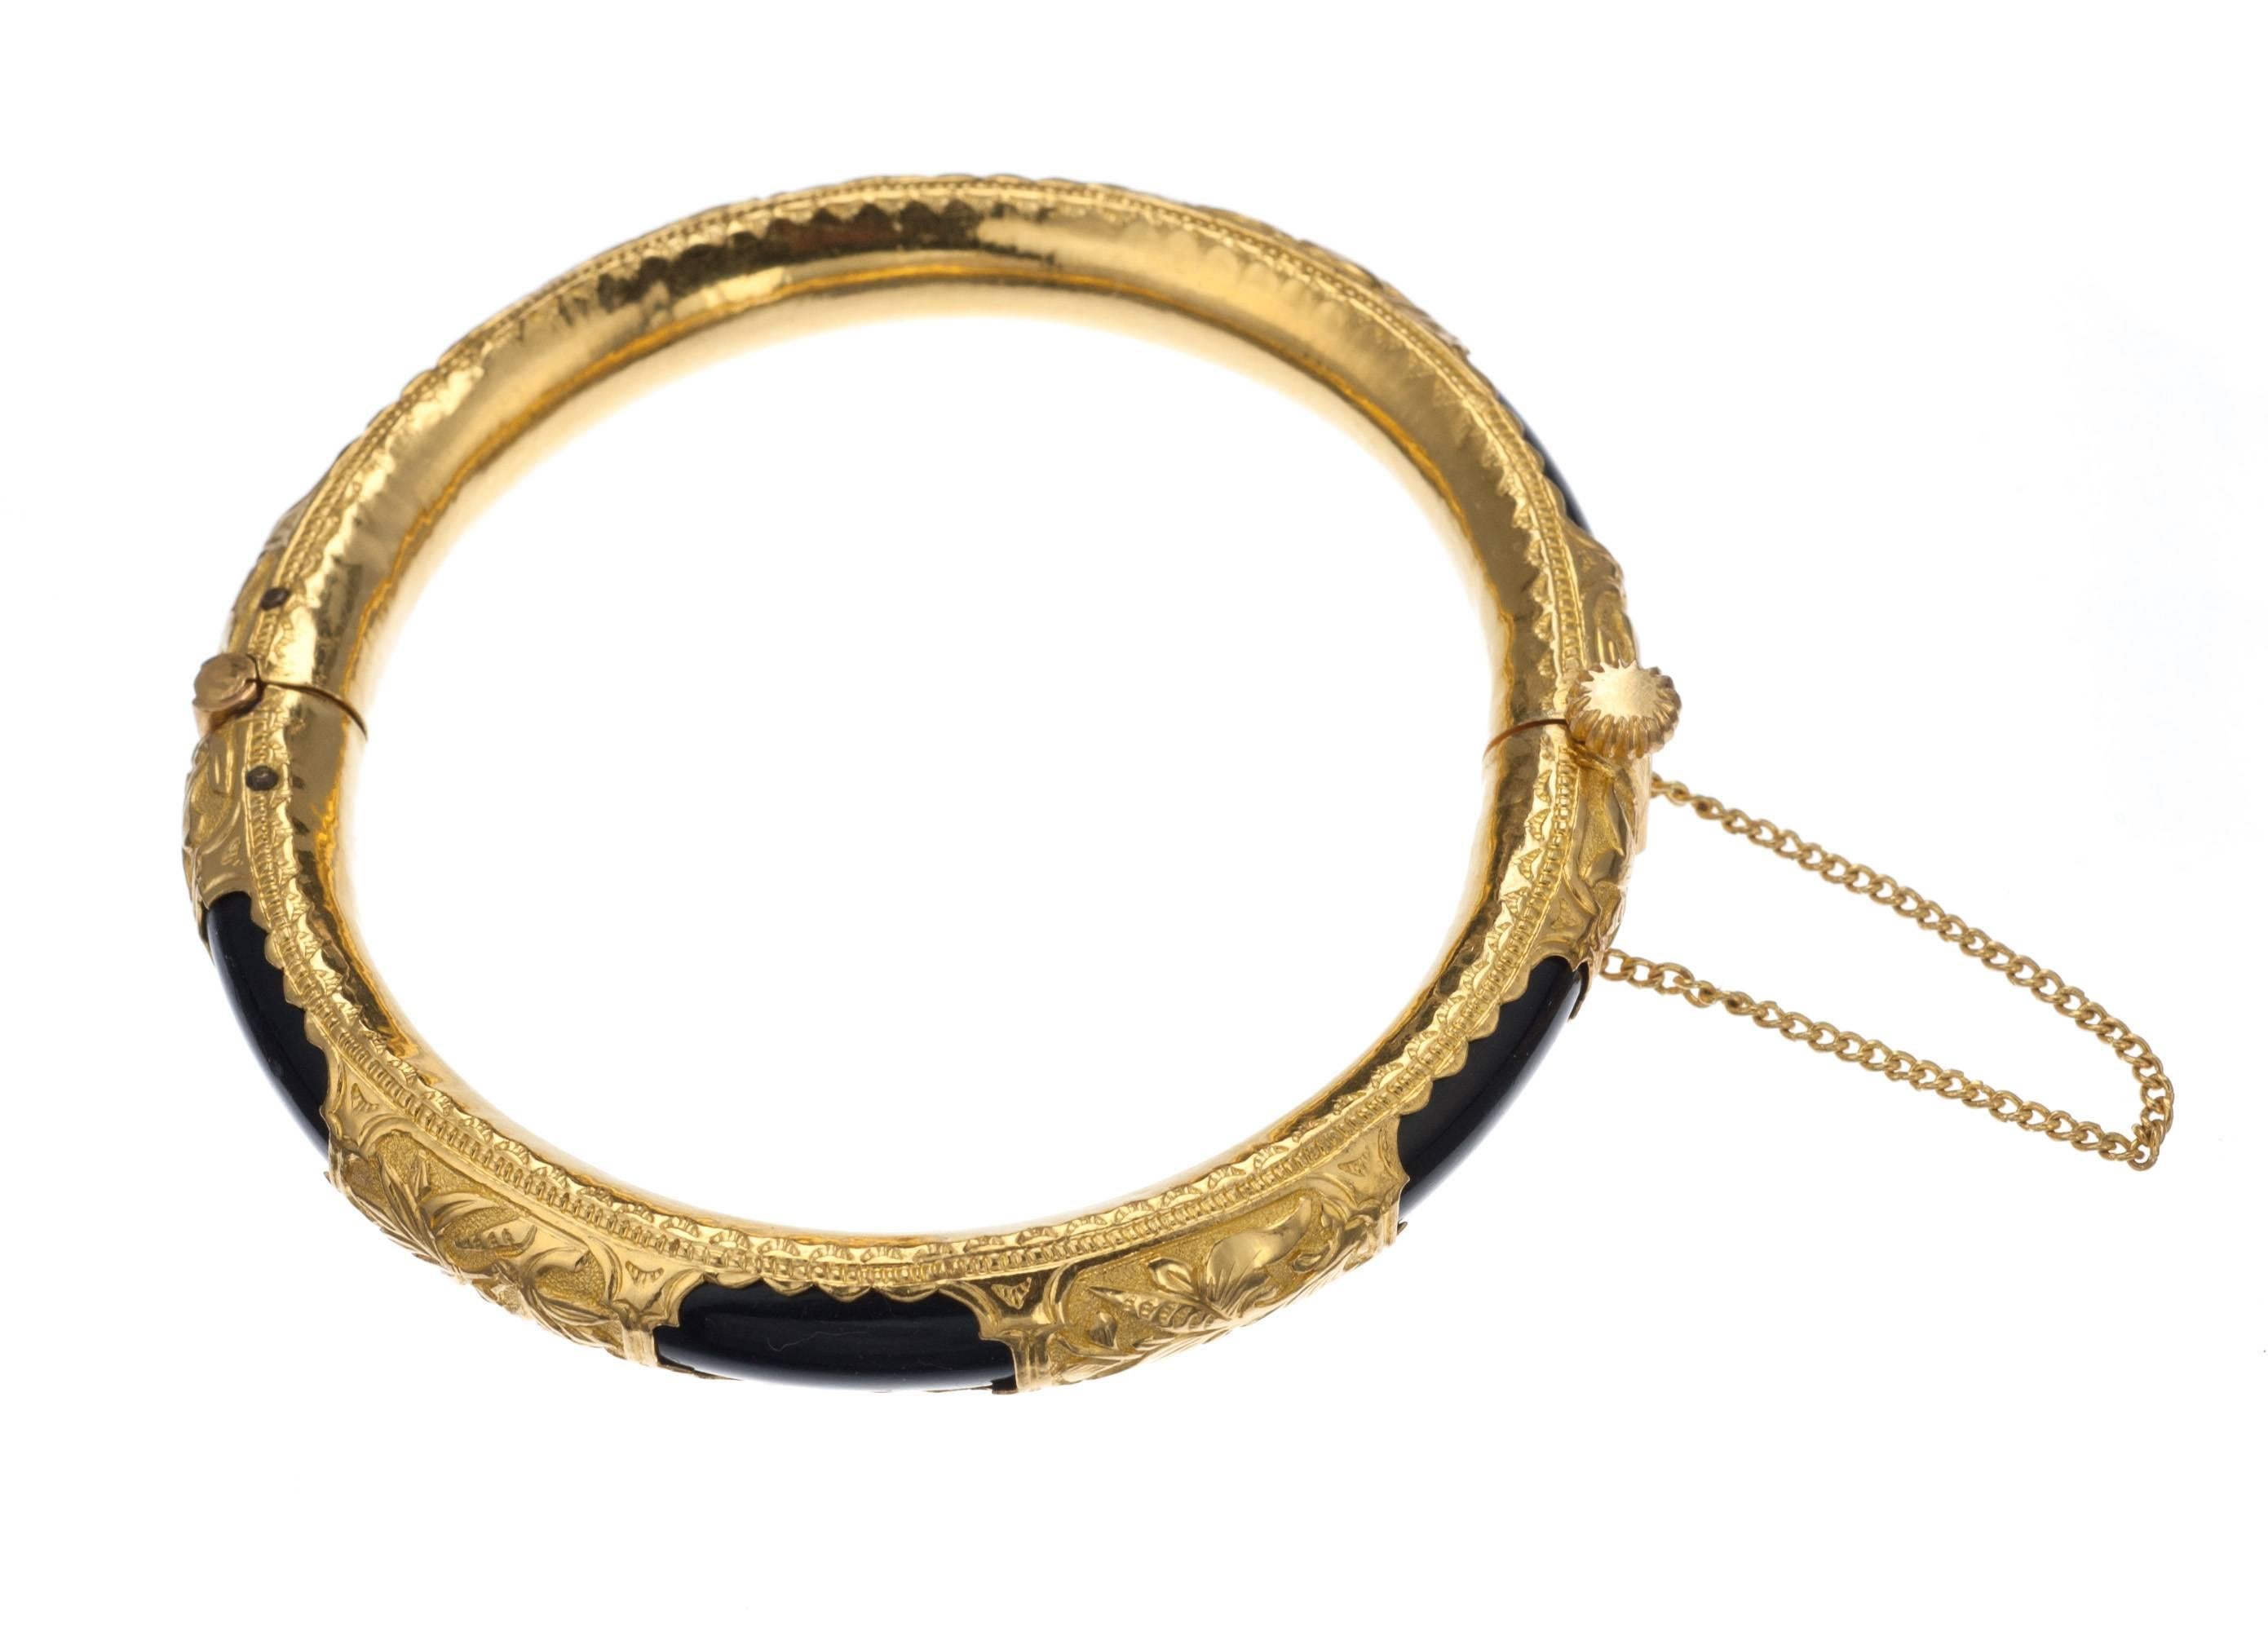 Fashioned from layers of 24-karat yellow gold and black onyx, a hinged bangle bracelet adorned with elaborate, classic floral motifs. Lightweight due to its clever construction, the bangle is fastened with a screw clasp and fitted with a safety